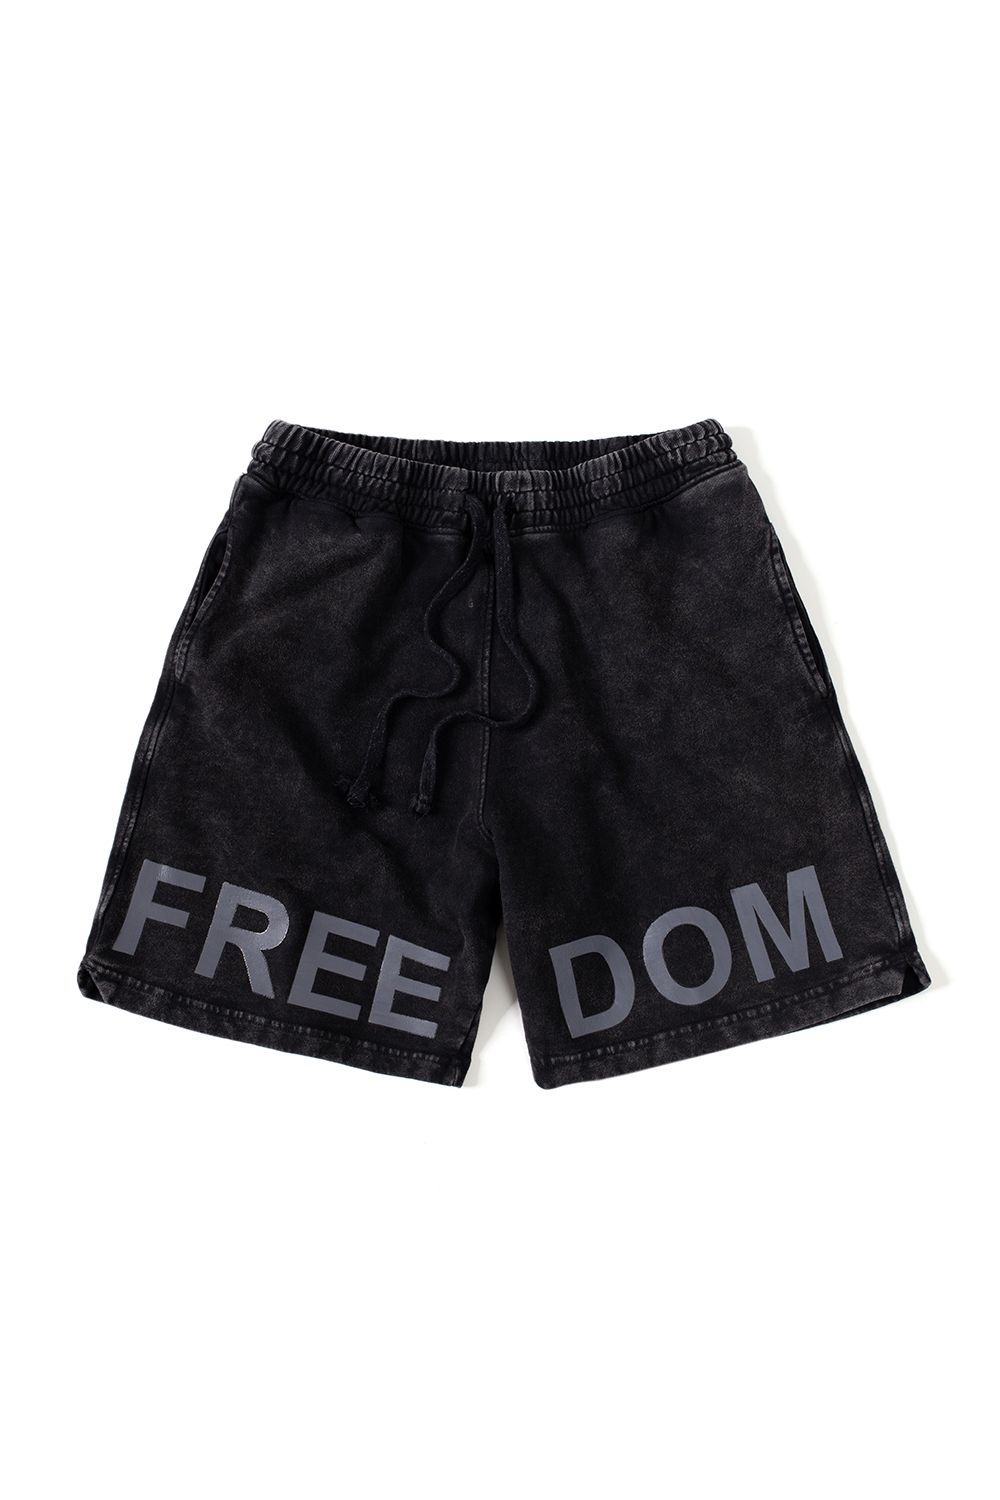 shorts thun nam totoday freedom totoday 1